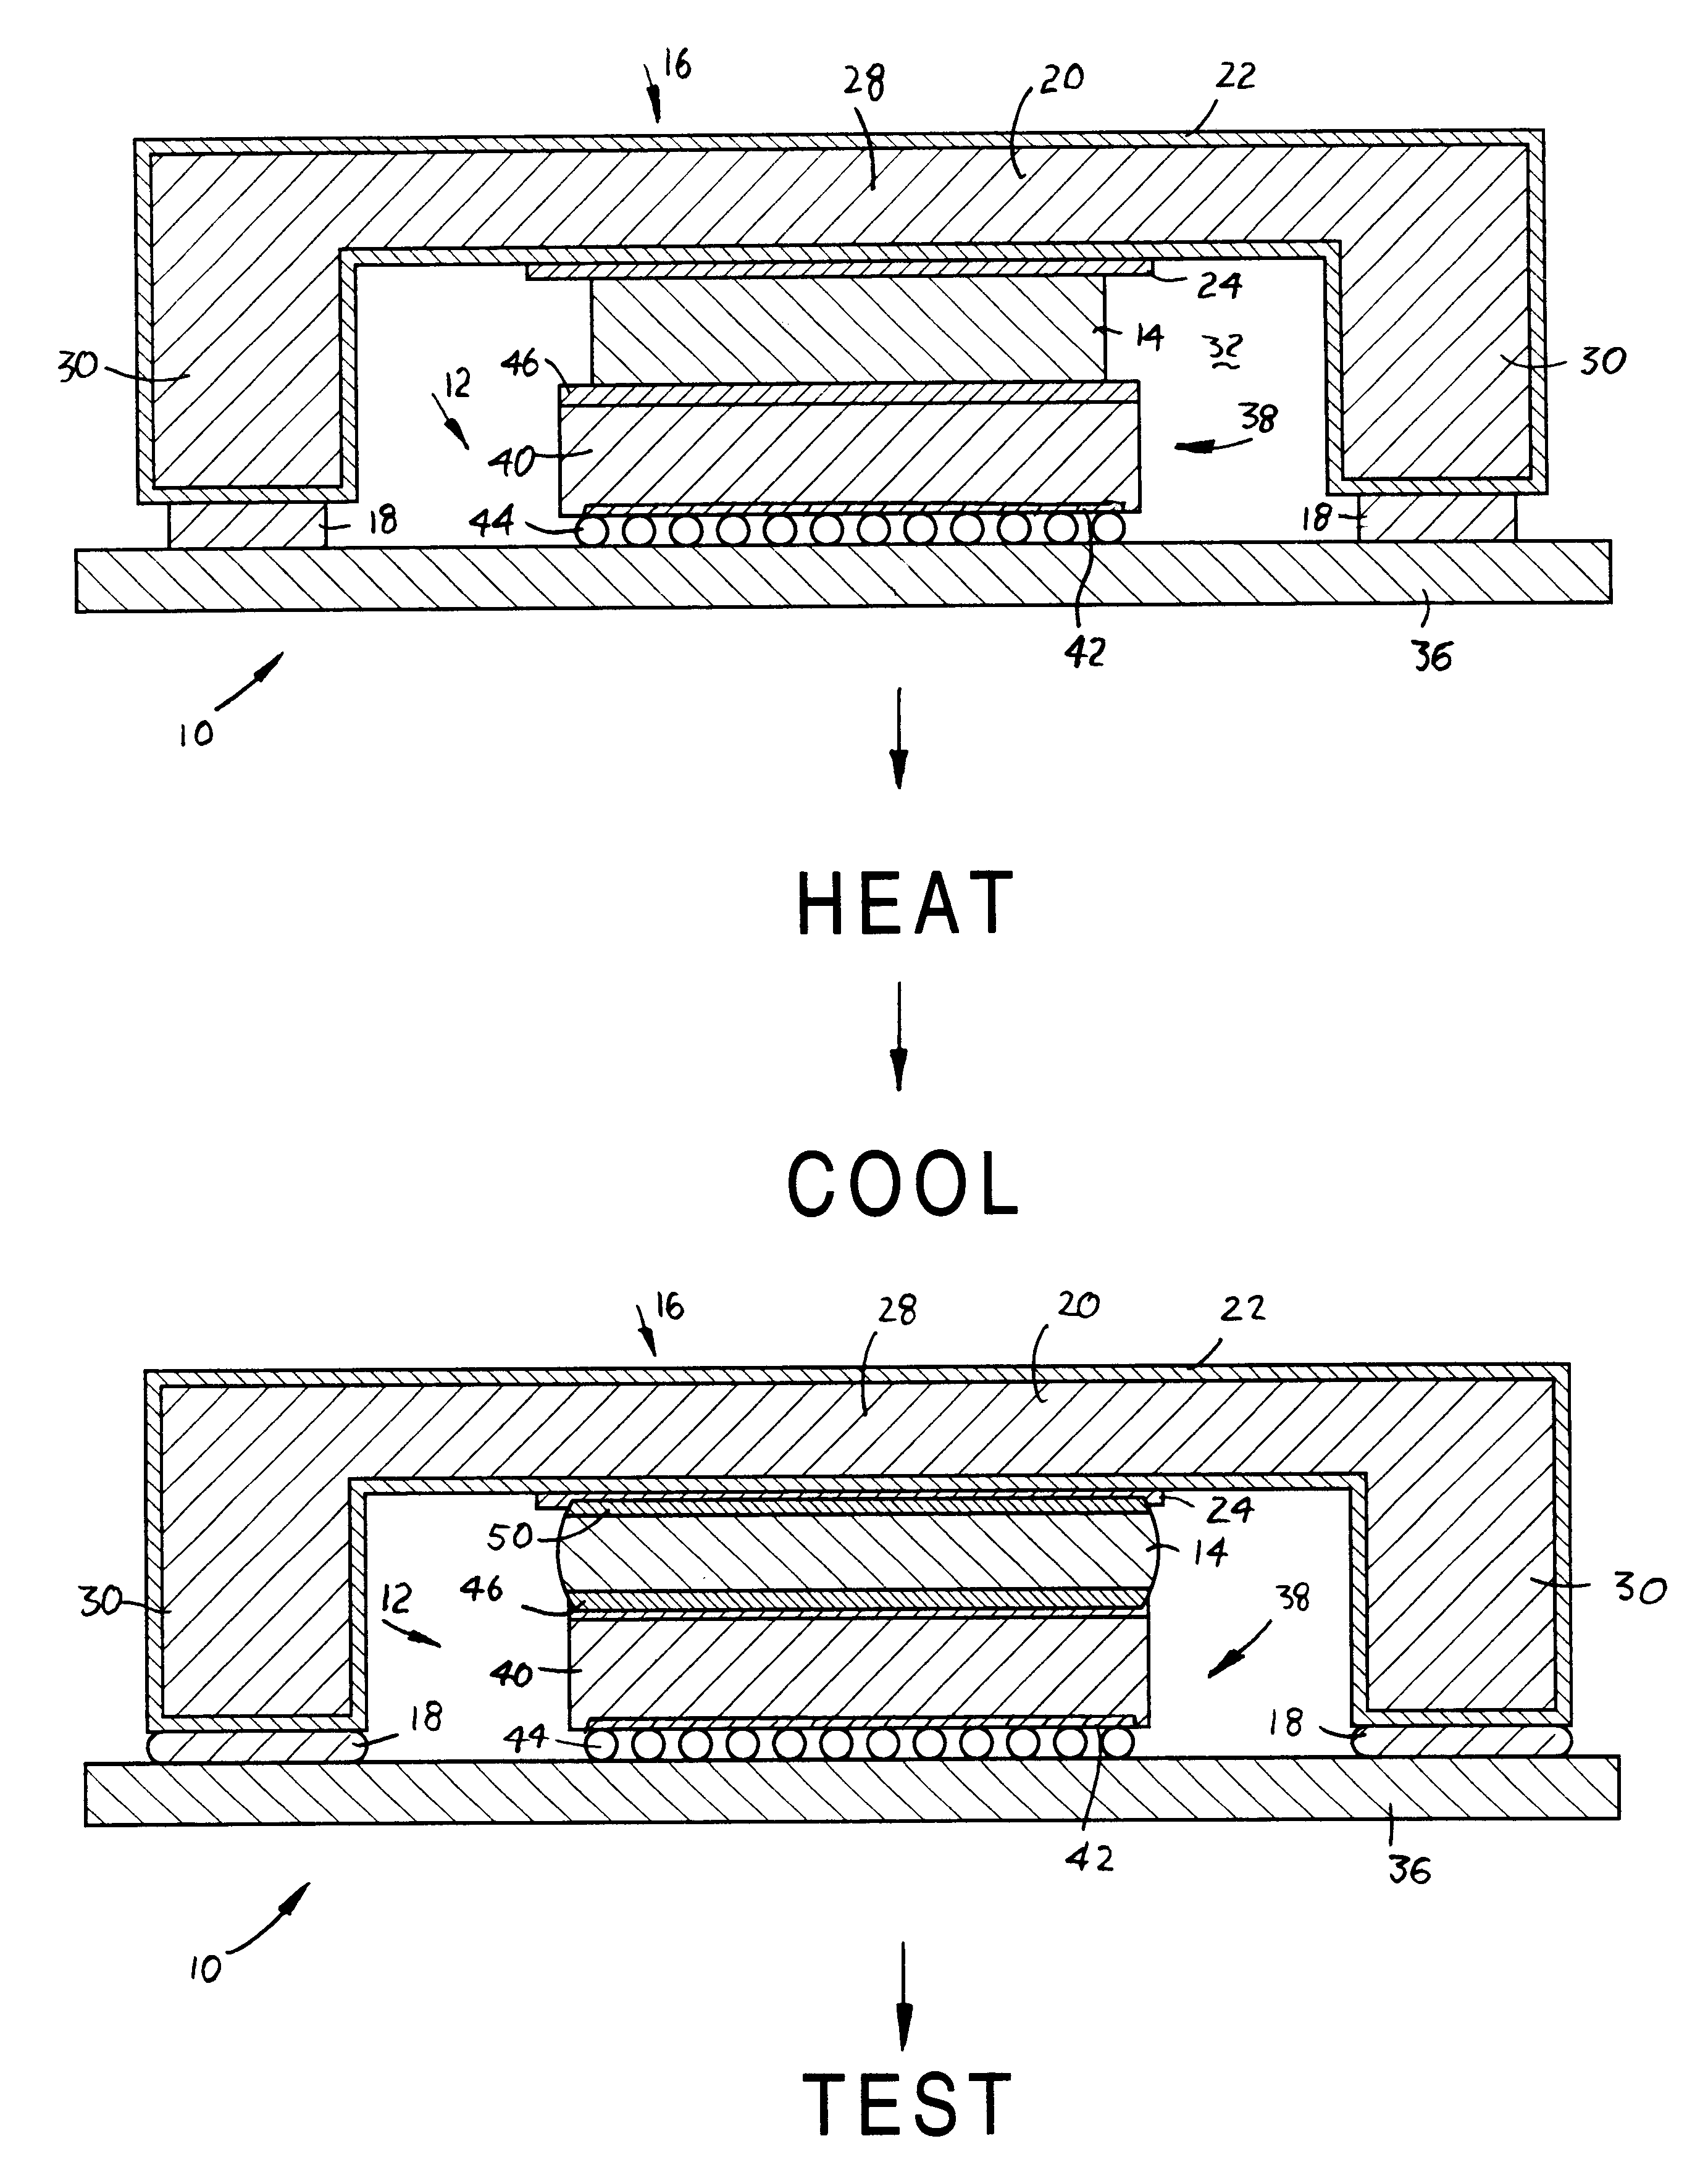 Electronic assembly having a wetting layer on a thermally conductive heat spreader